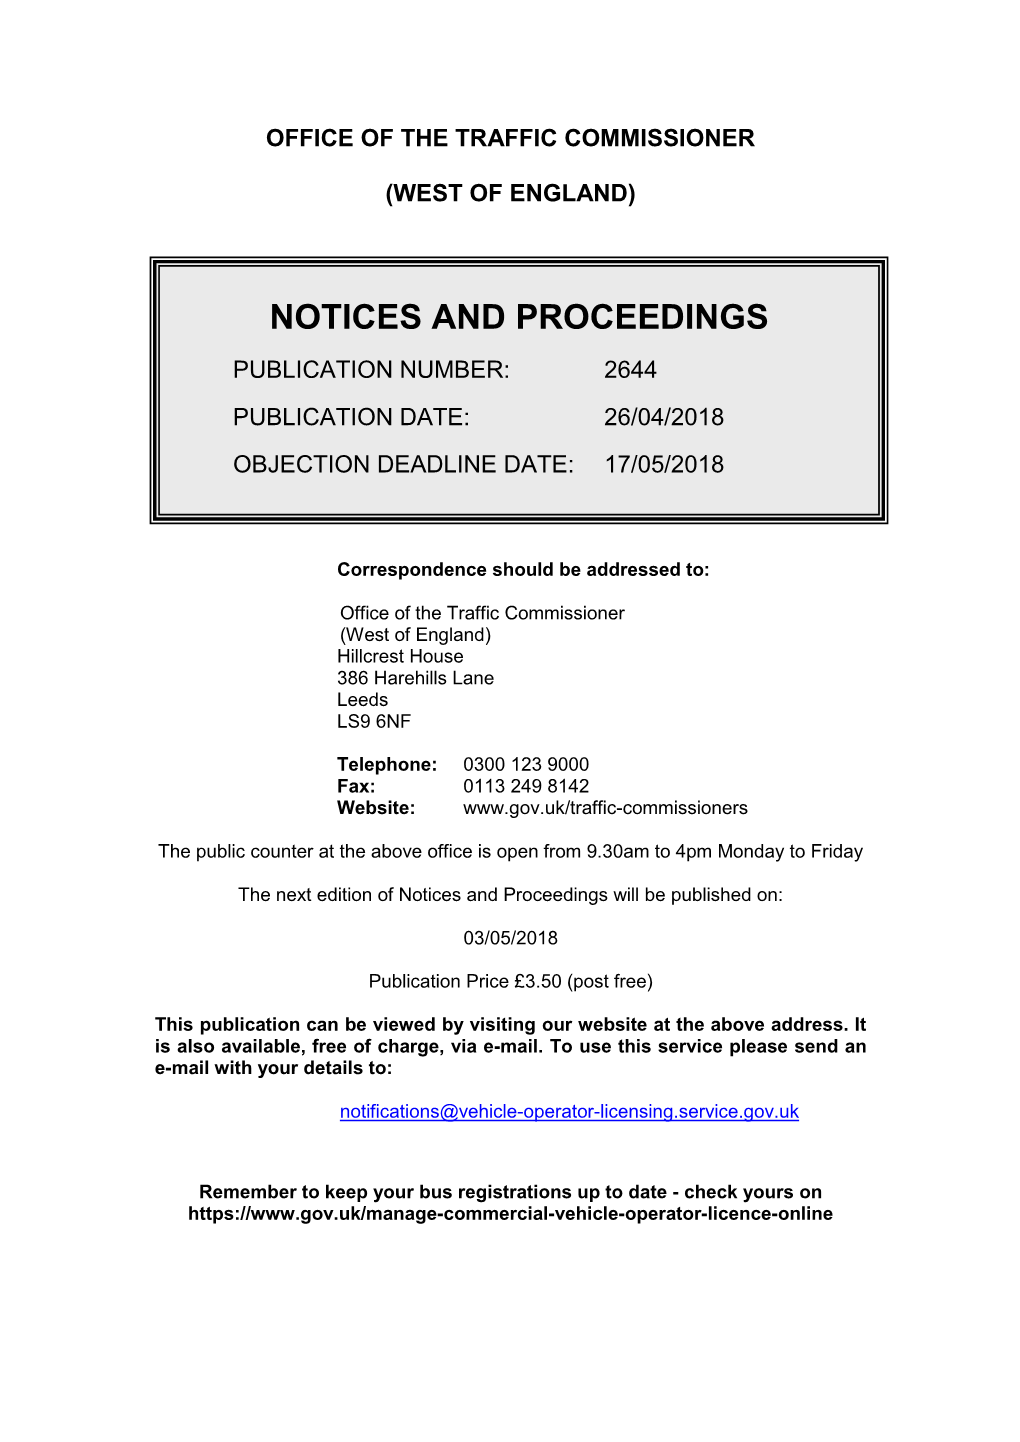 Notices and Proceedings for the West of England